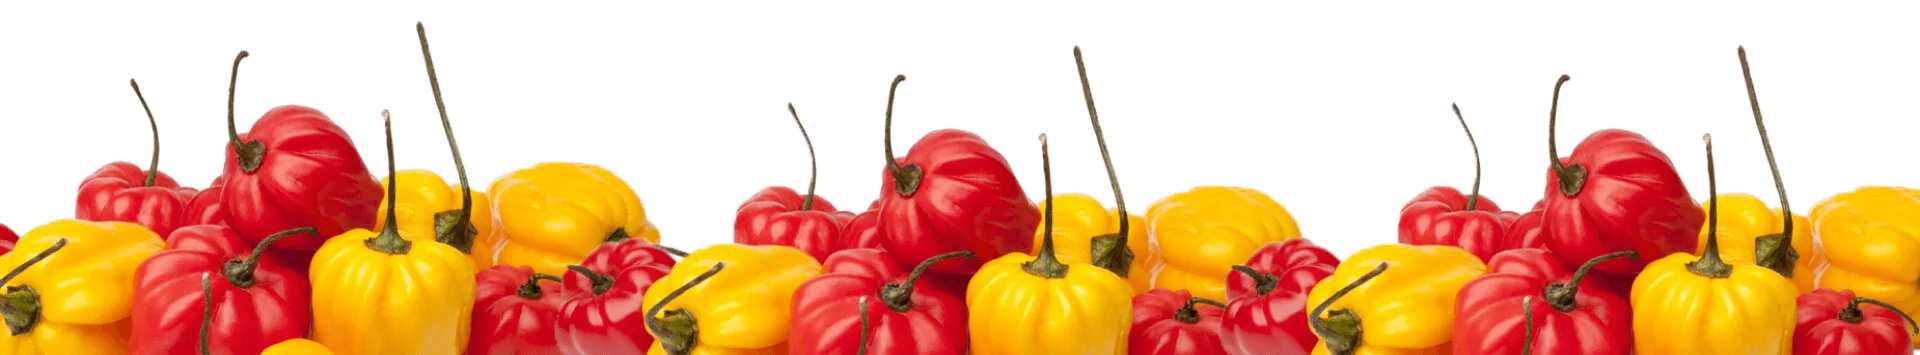 negril peppers